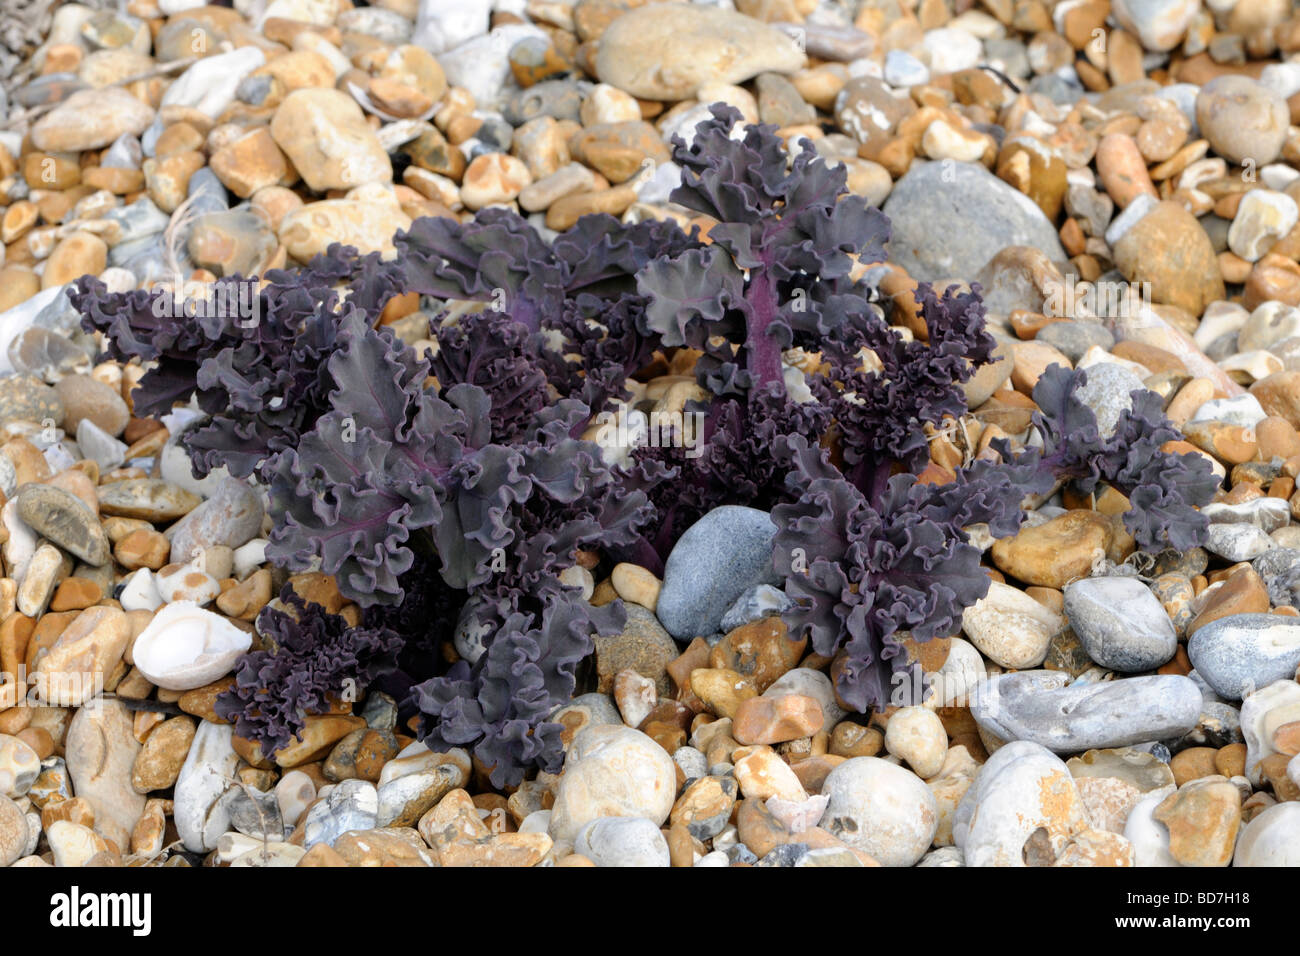 Sea Kale (Crambe maritima) on a pebble beach. New sprouts are growing from an old tap root extending deep into the shingle. Stock Photo